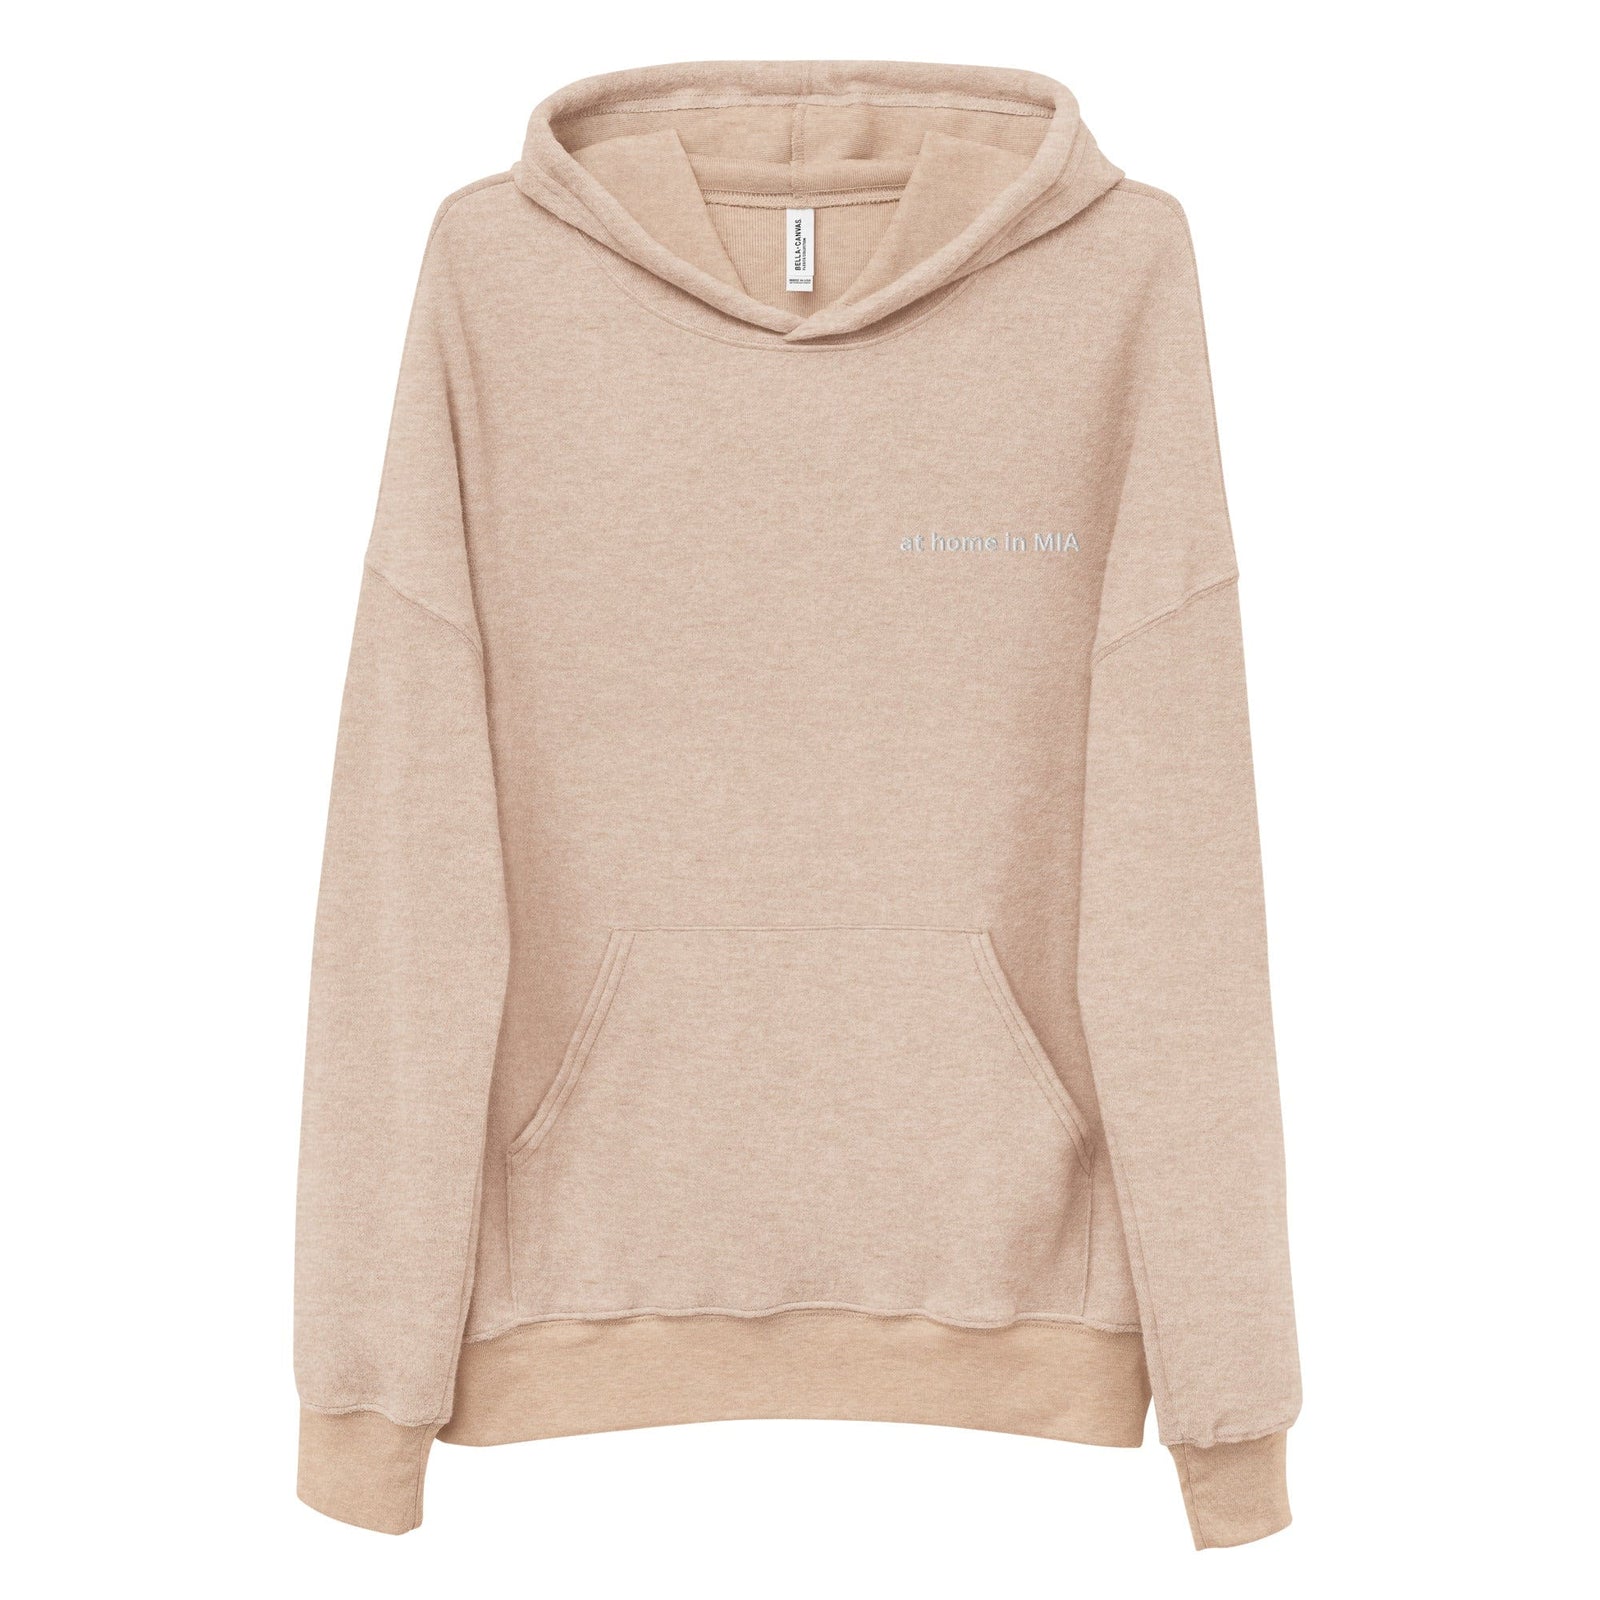 City Shirt Co at home in MIA™ sueded hoodie Heather Oat / S